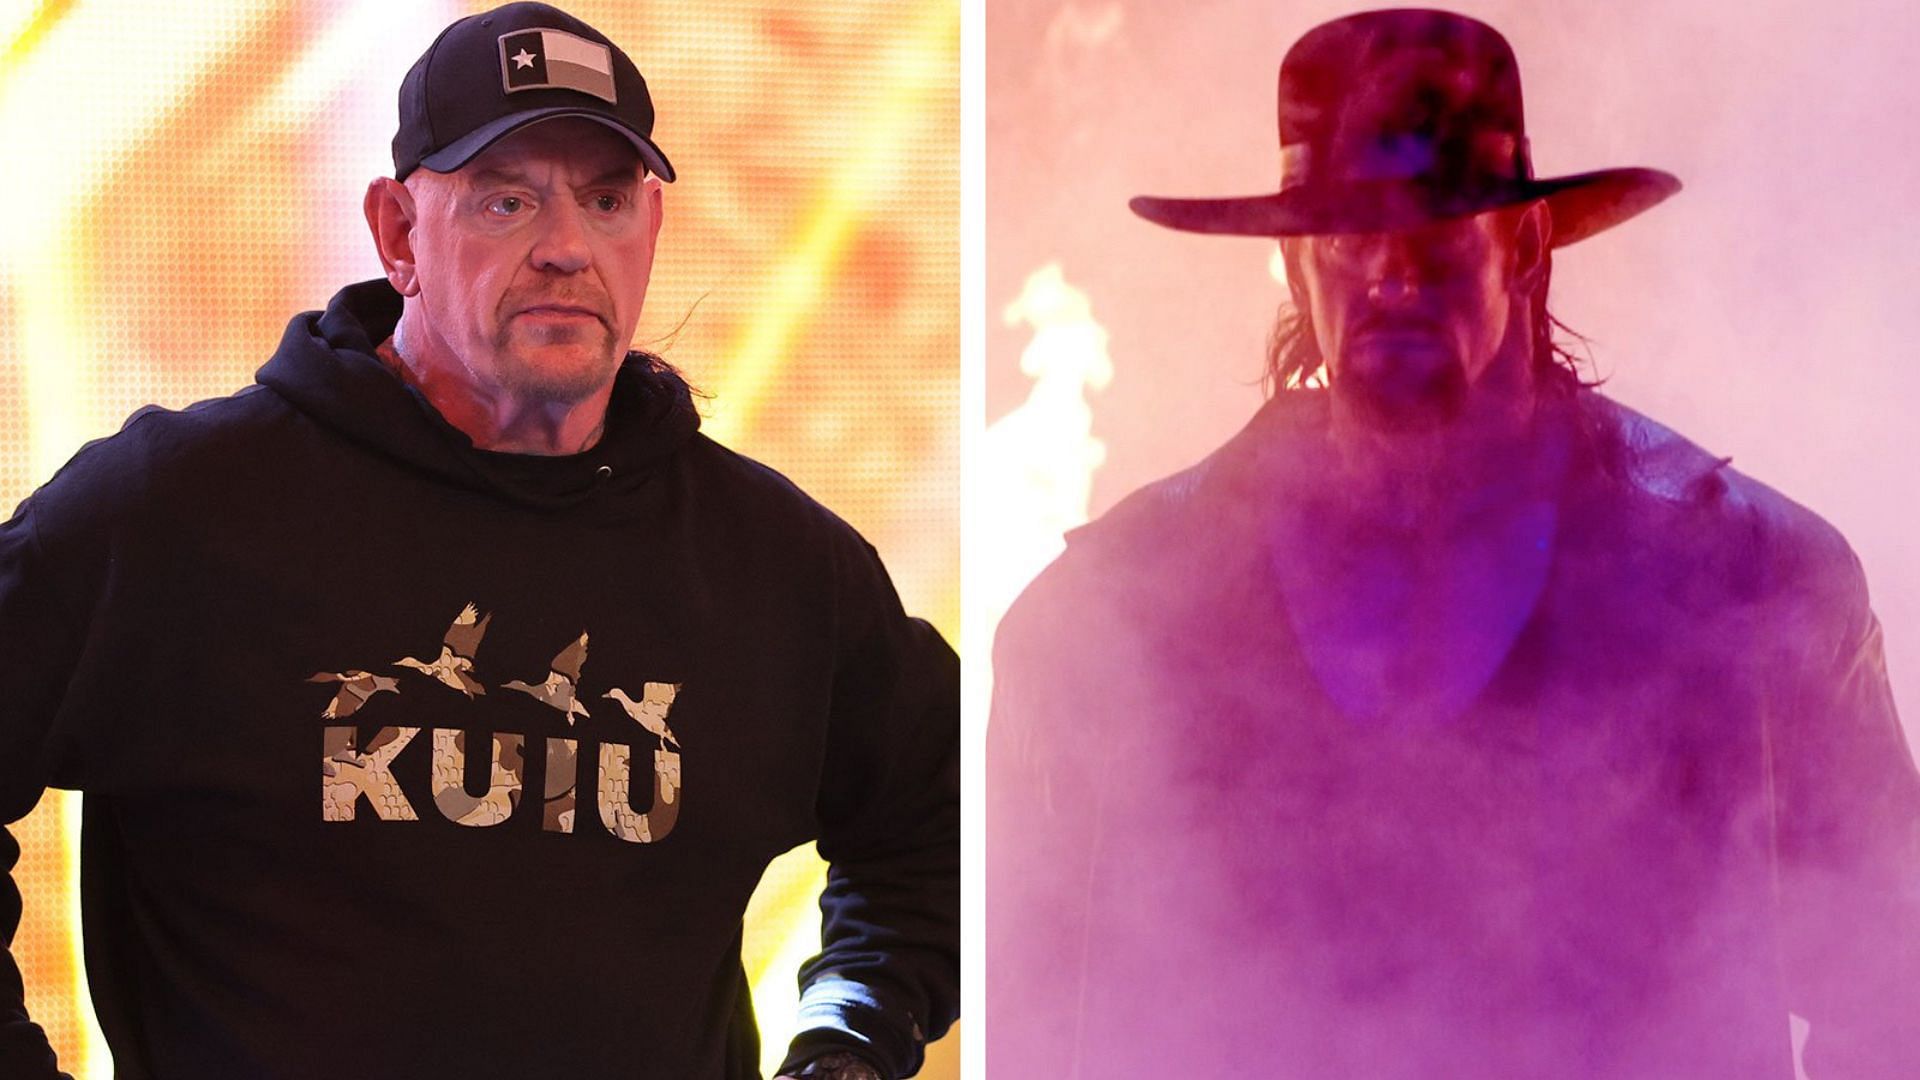 The Undertaker has a brand new project seemingly unassociated with WWE